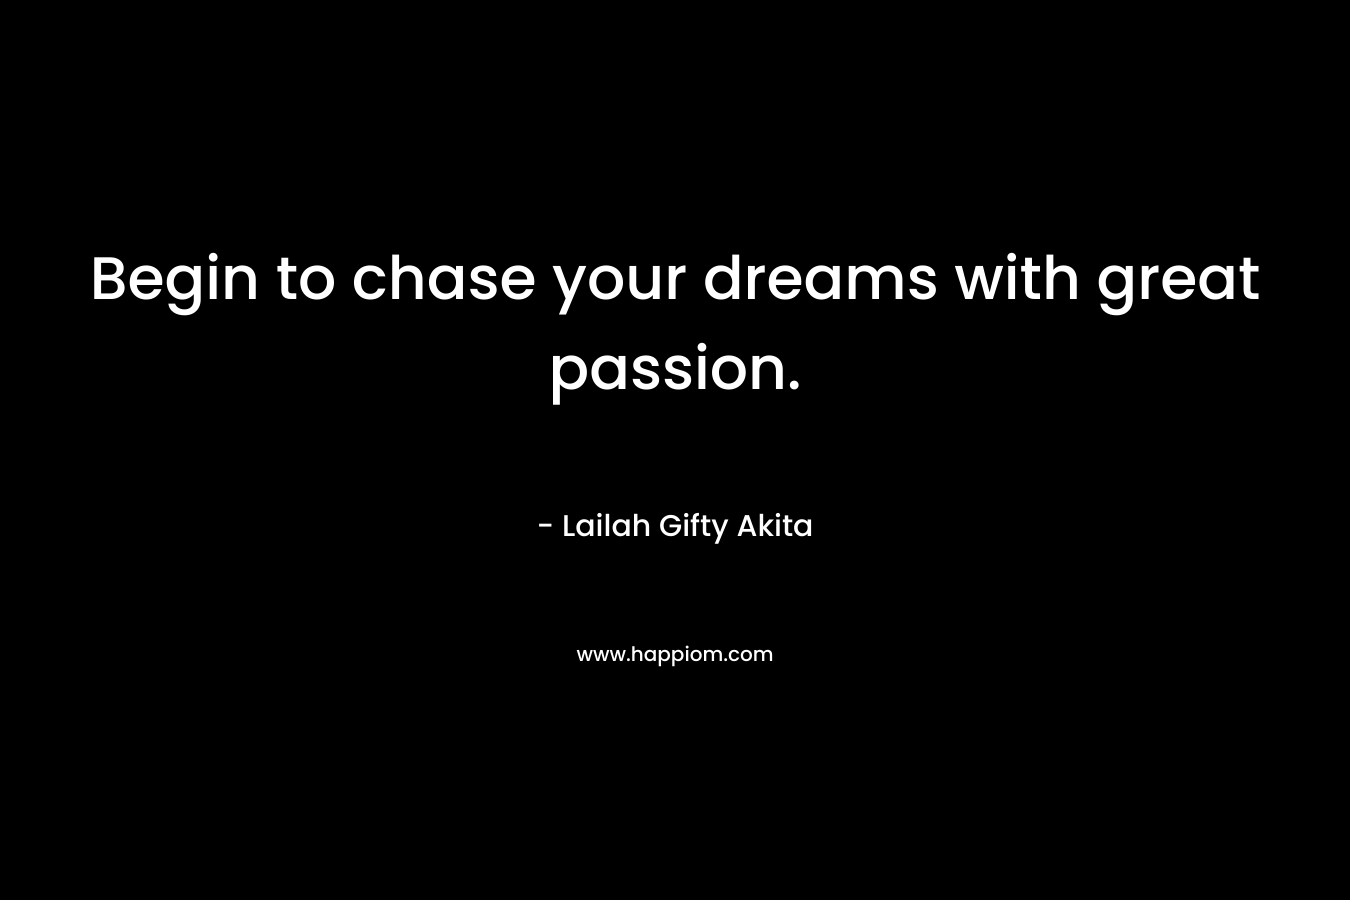 Begin to chase your dreams with great passion.